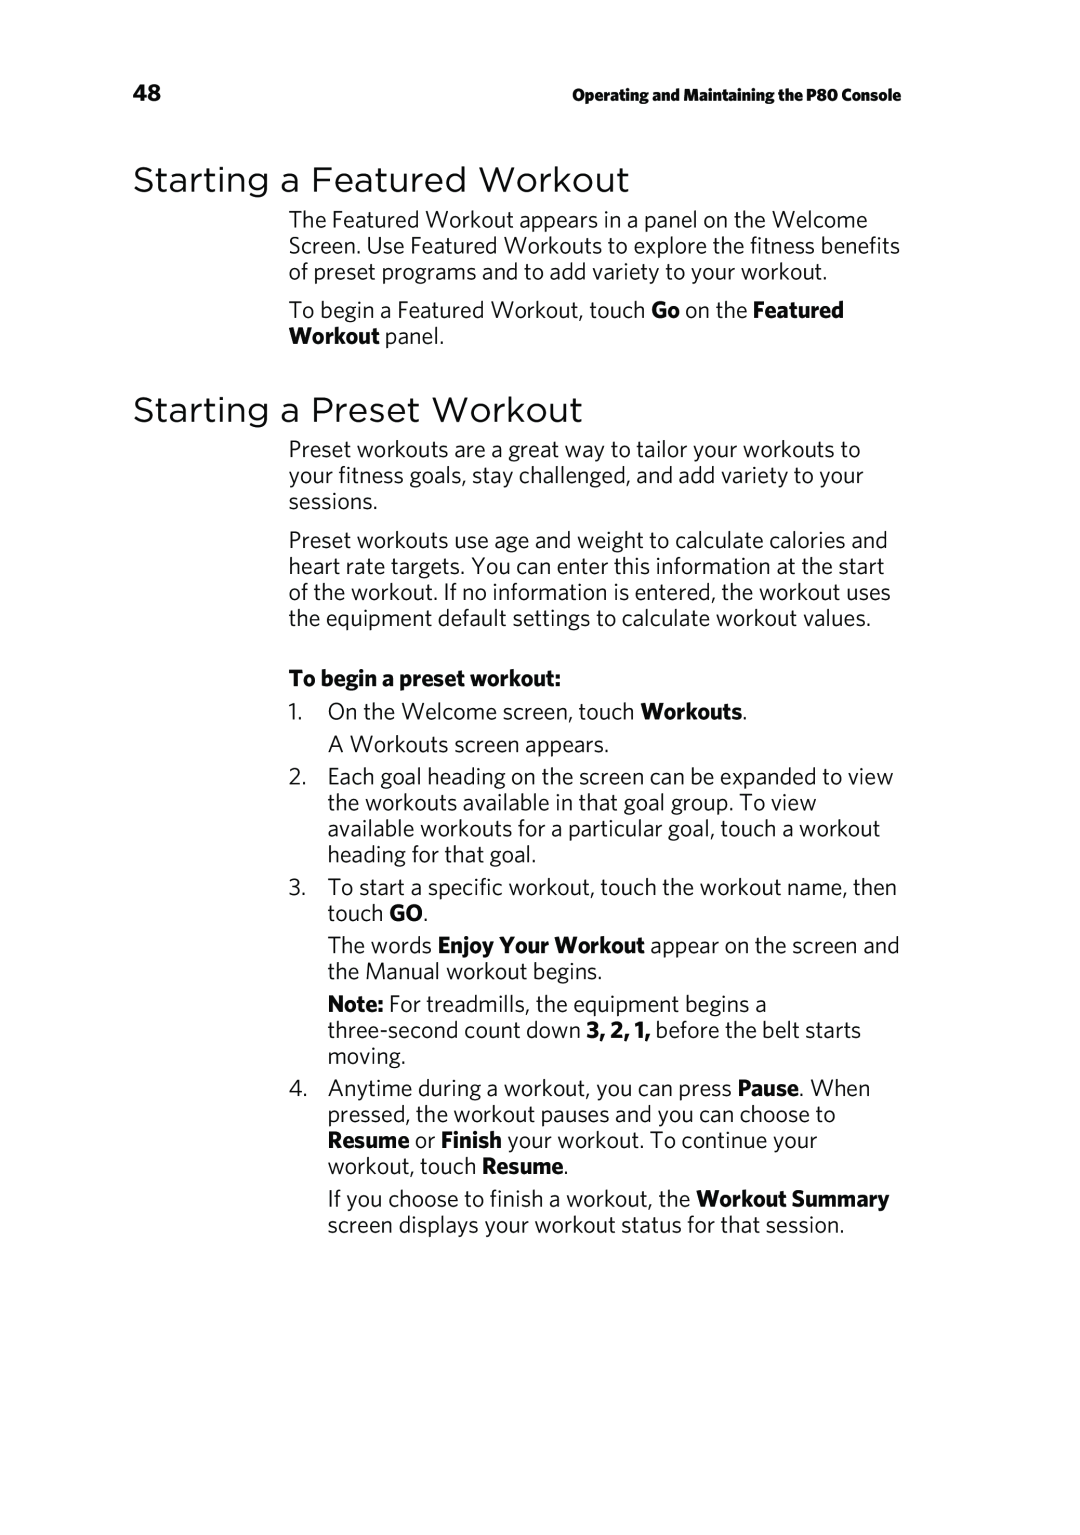 Precor P80 manual Starting a Featured Workout, Starting a Preset Workout, To begin a preset workout 